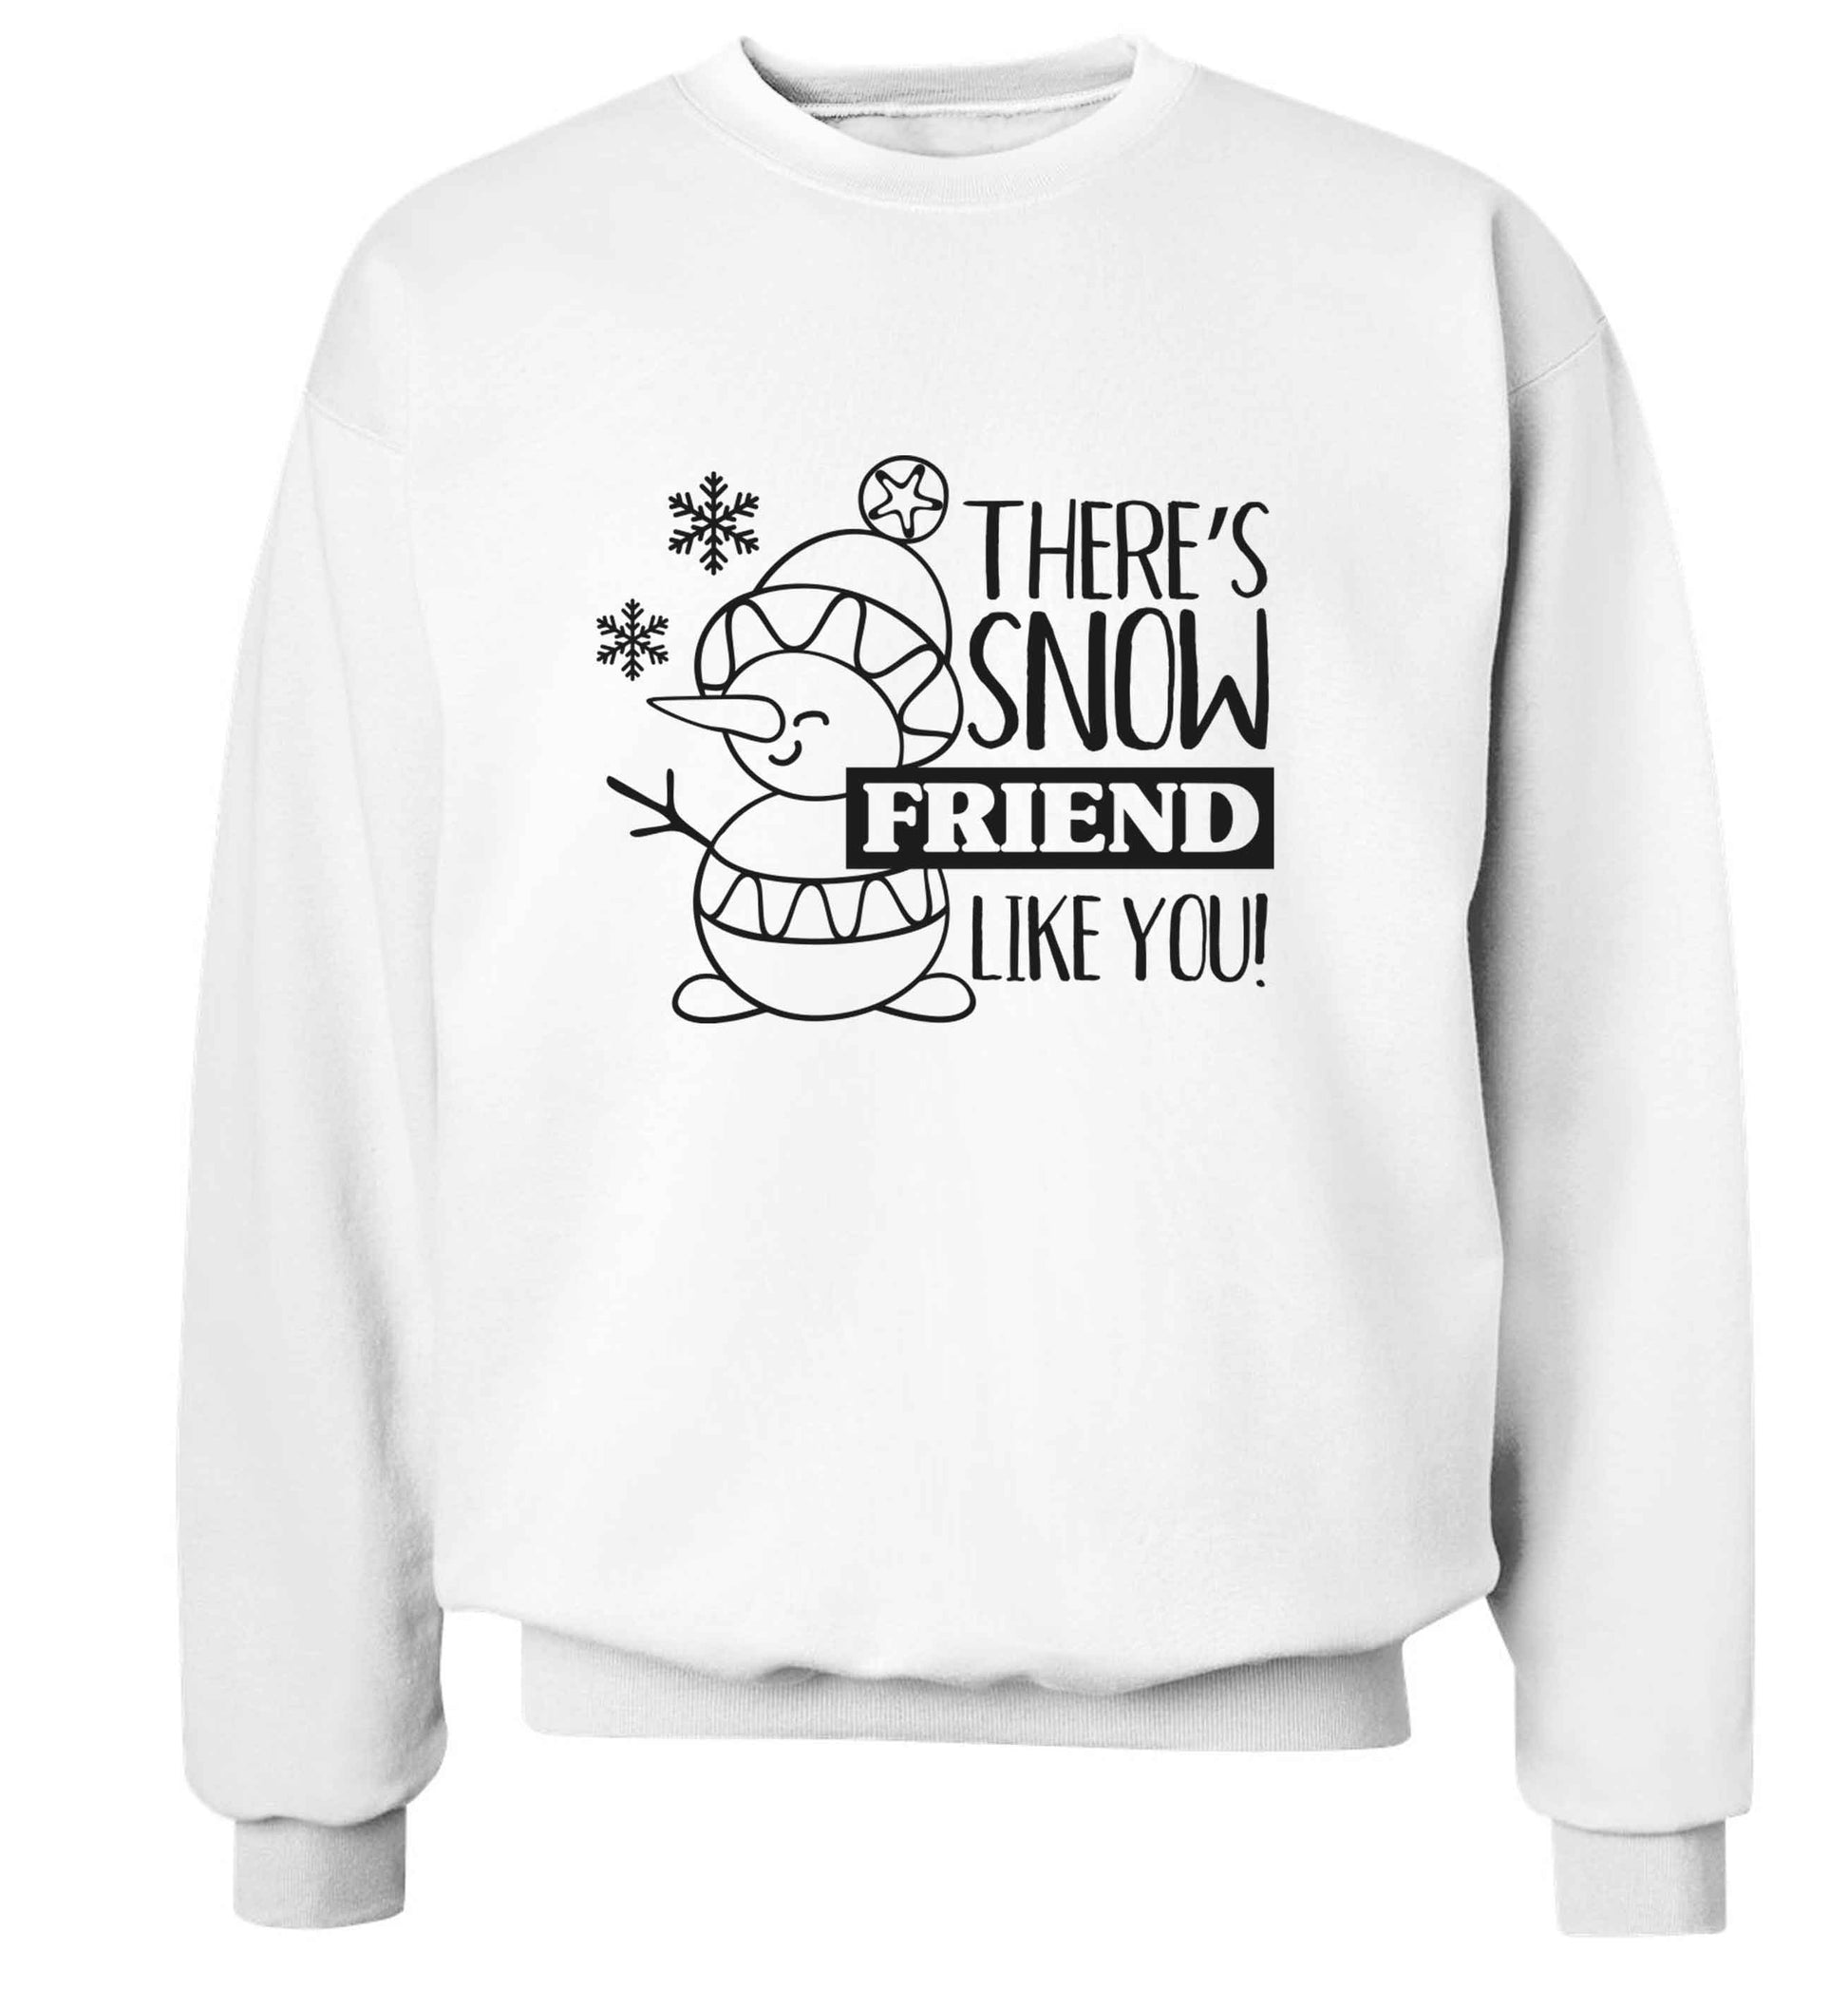 There's snow friend like you adult's unisex white sweater 2XL